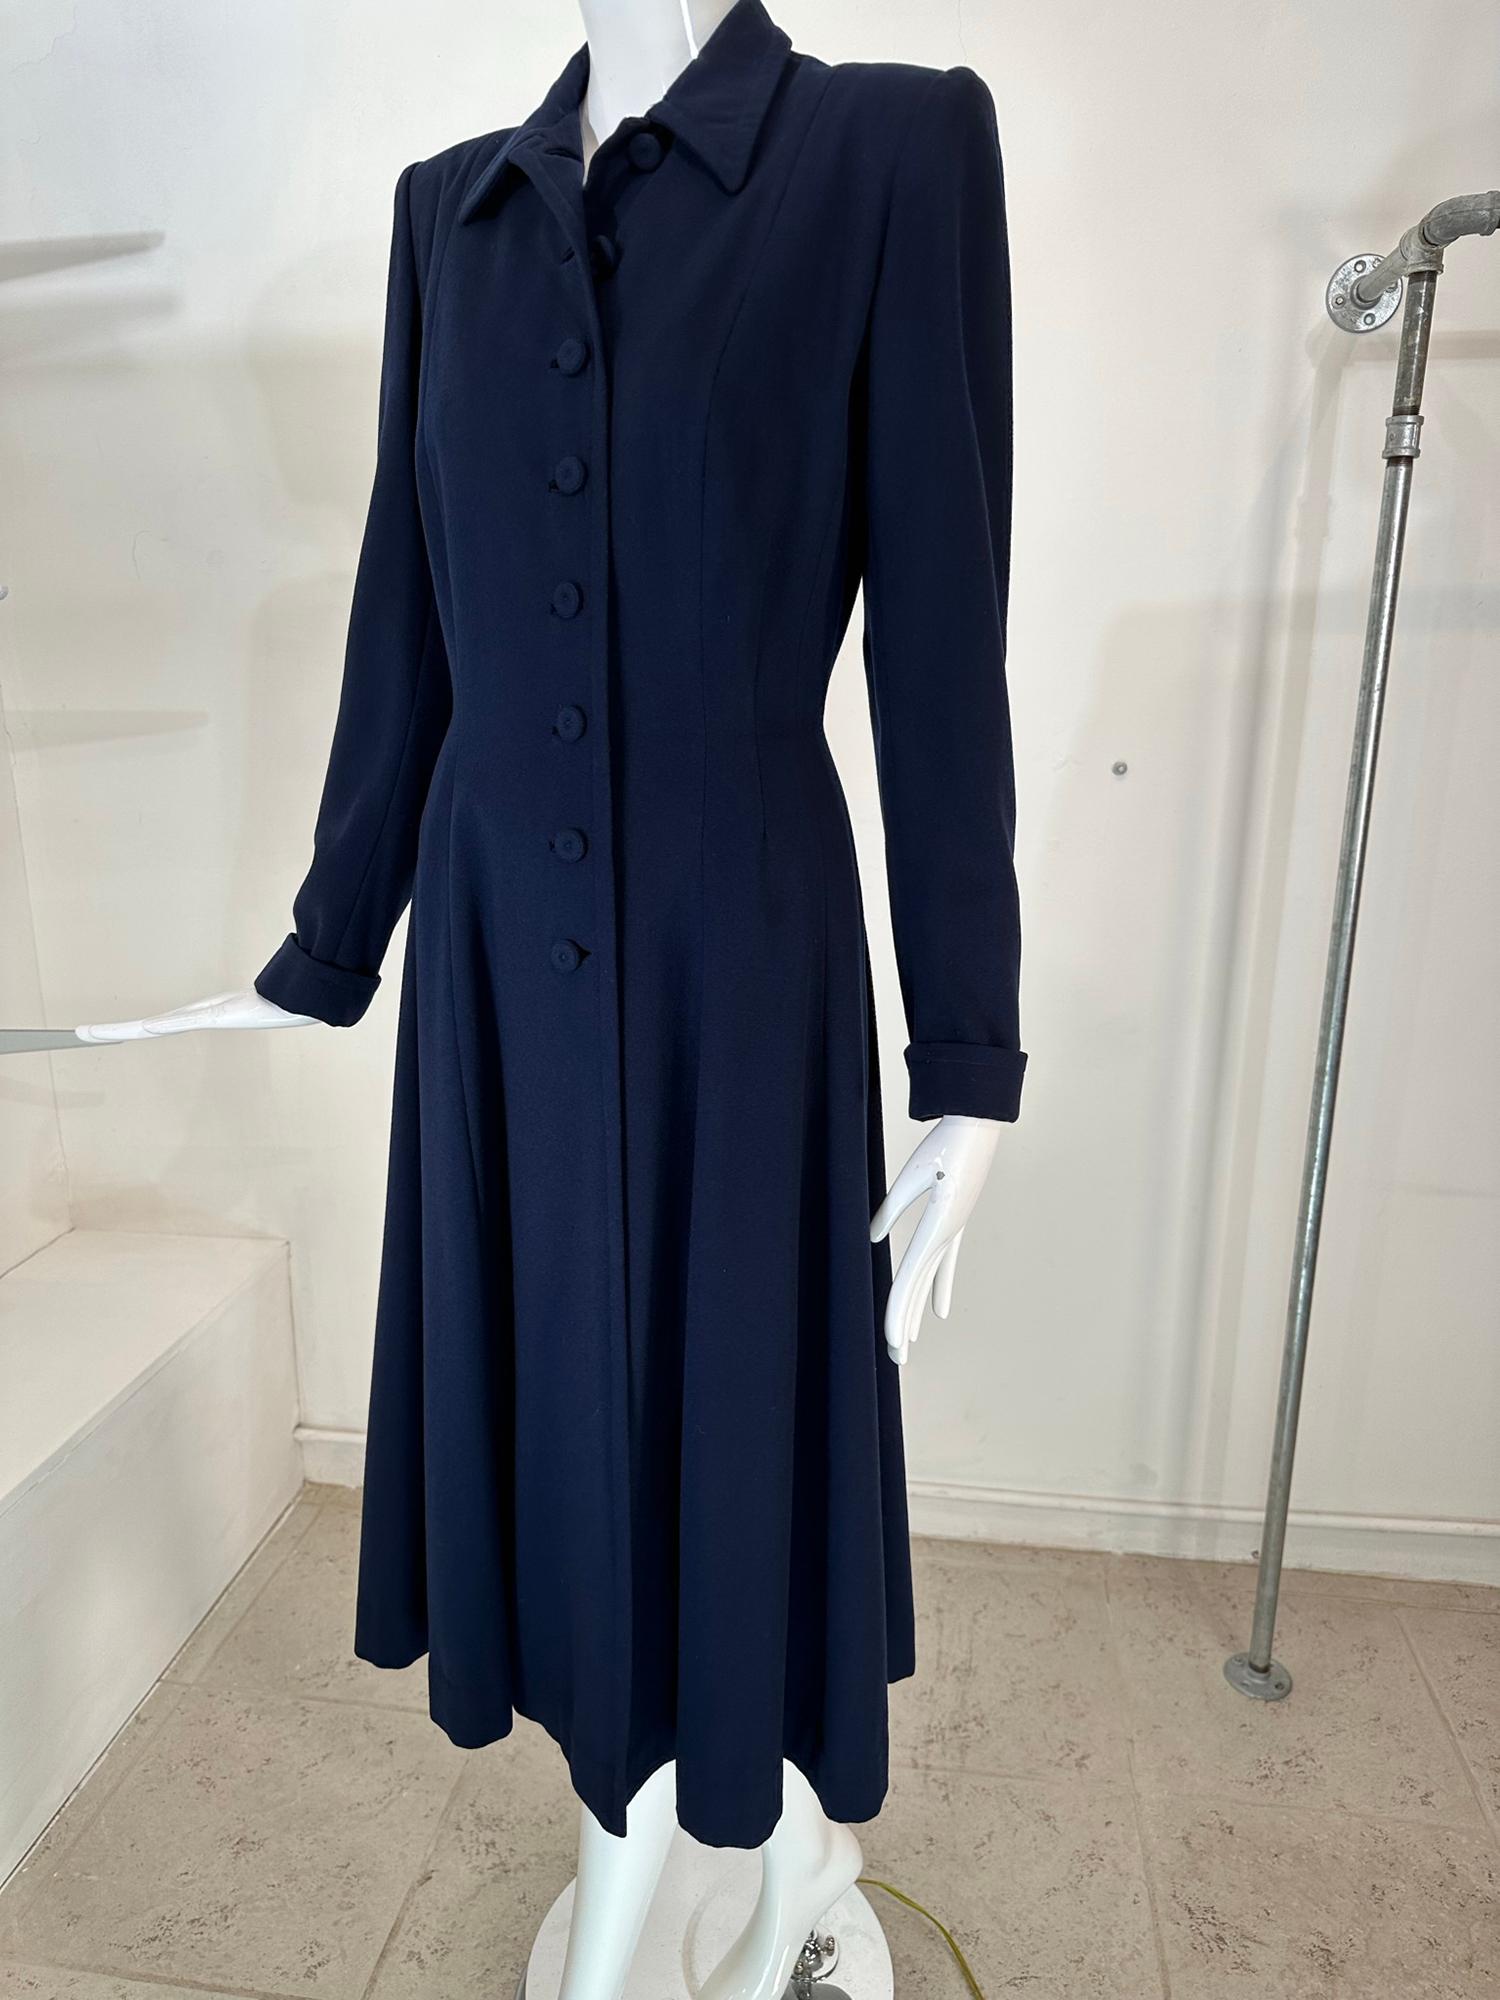 1940s navy blue wool princess coat, from Peterson Gerzog, Providence Rhode Island. A beautiful classic wool coat with amazing details such as, hand bound button holes, hand covered embroidered buttons at the front and on the turned back cuffs, the